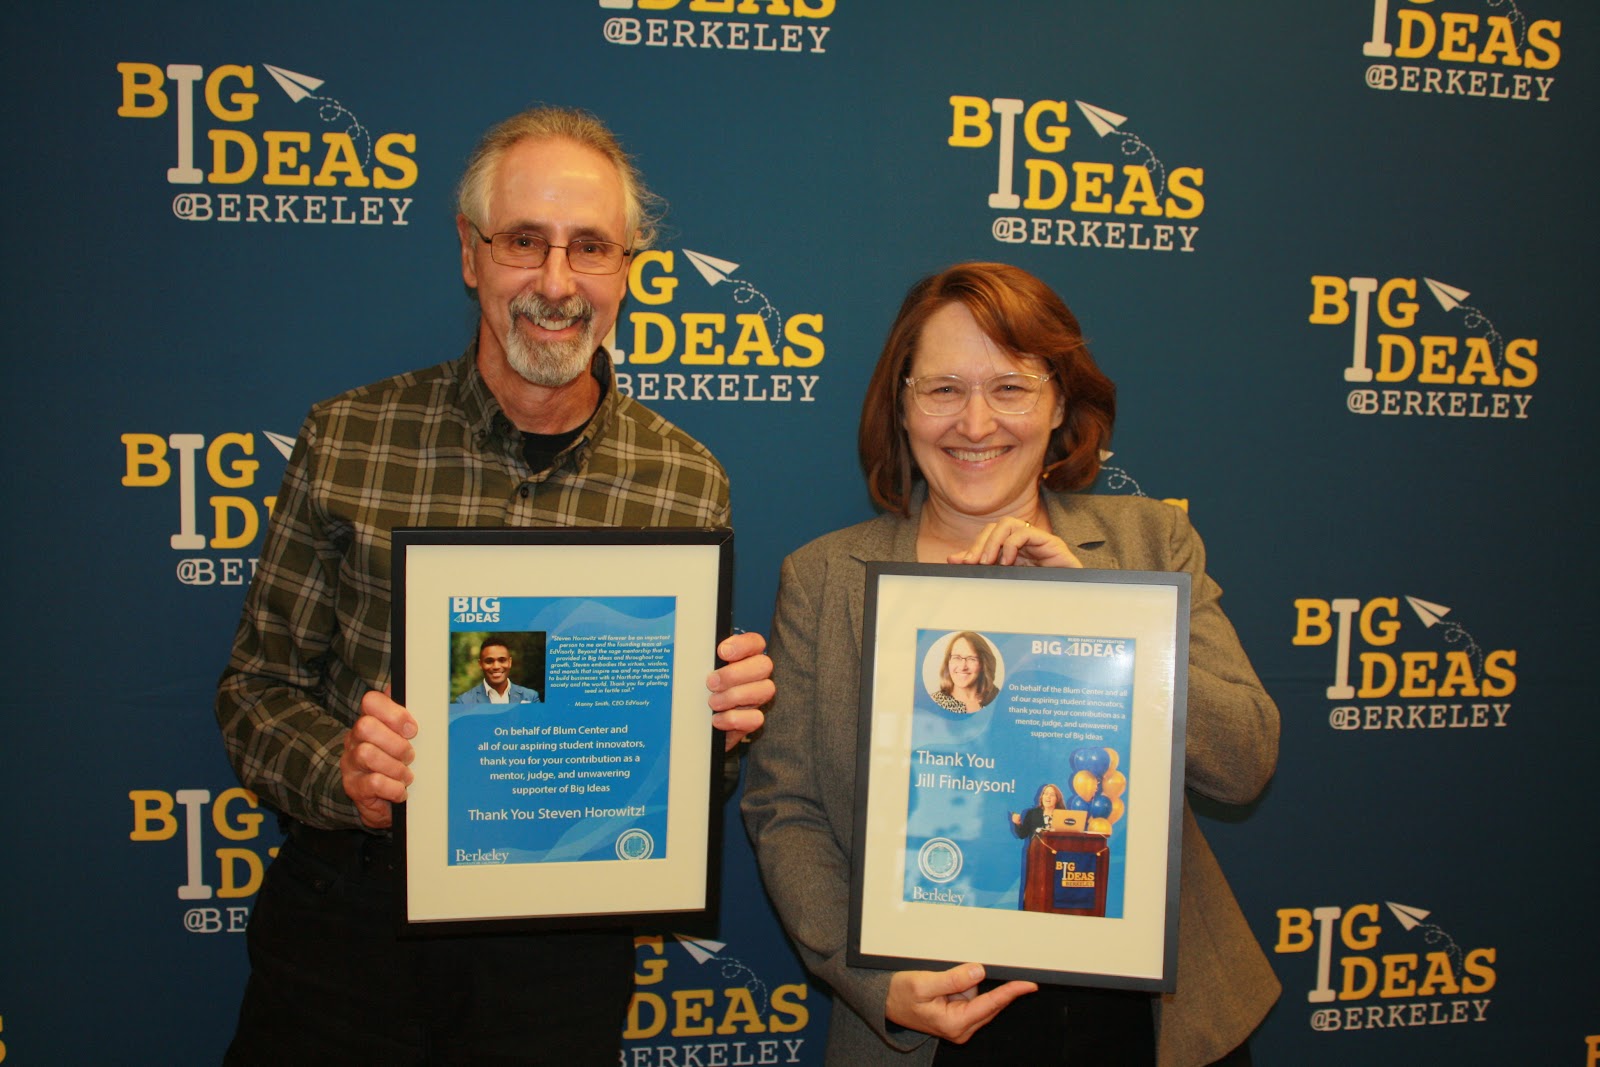 Big Ideas honored Jill Finlayson and Steven Horowitz for their long-time commitment to UC Berkeley students as Big Ideas’ mentors and judges. This year marked Horowitz’s 10 year mark with Big Ideas. Finlayson has been with the program for more than 12 years